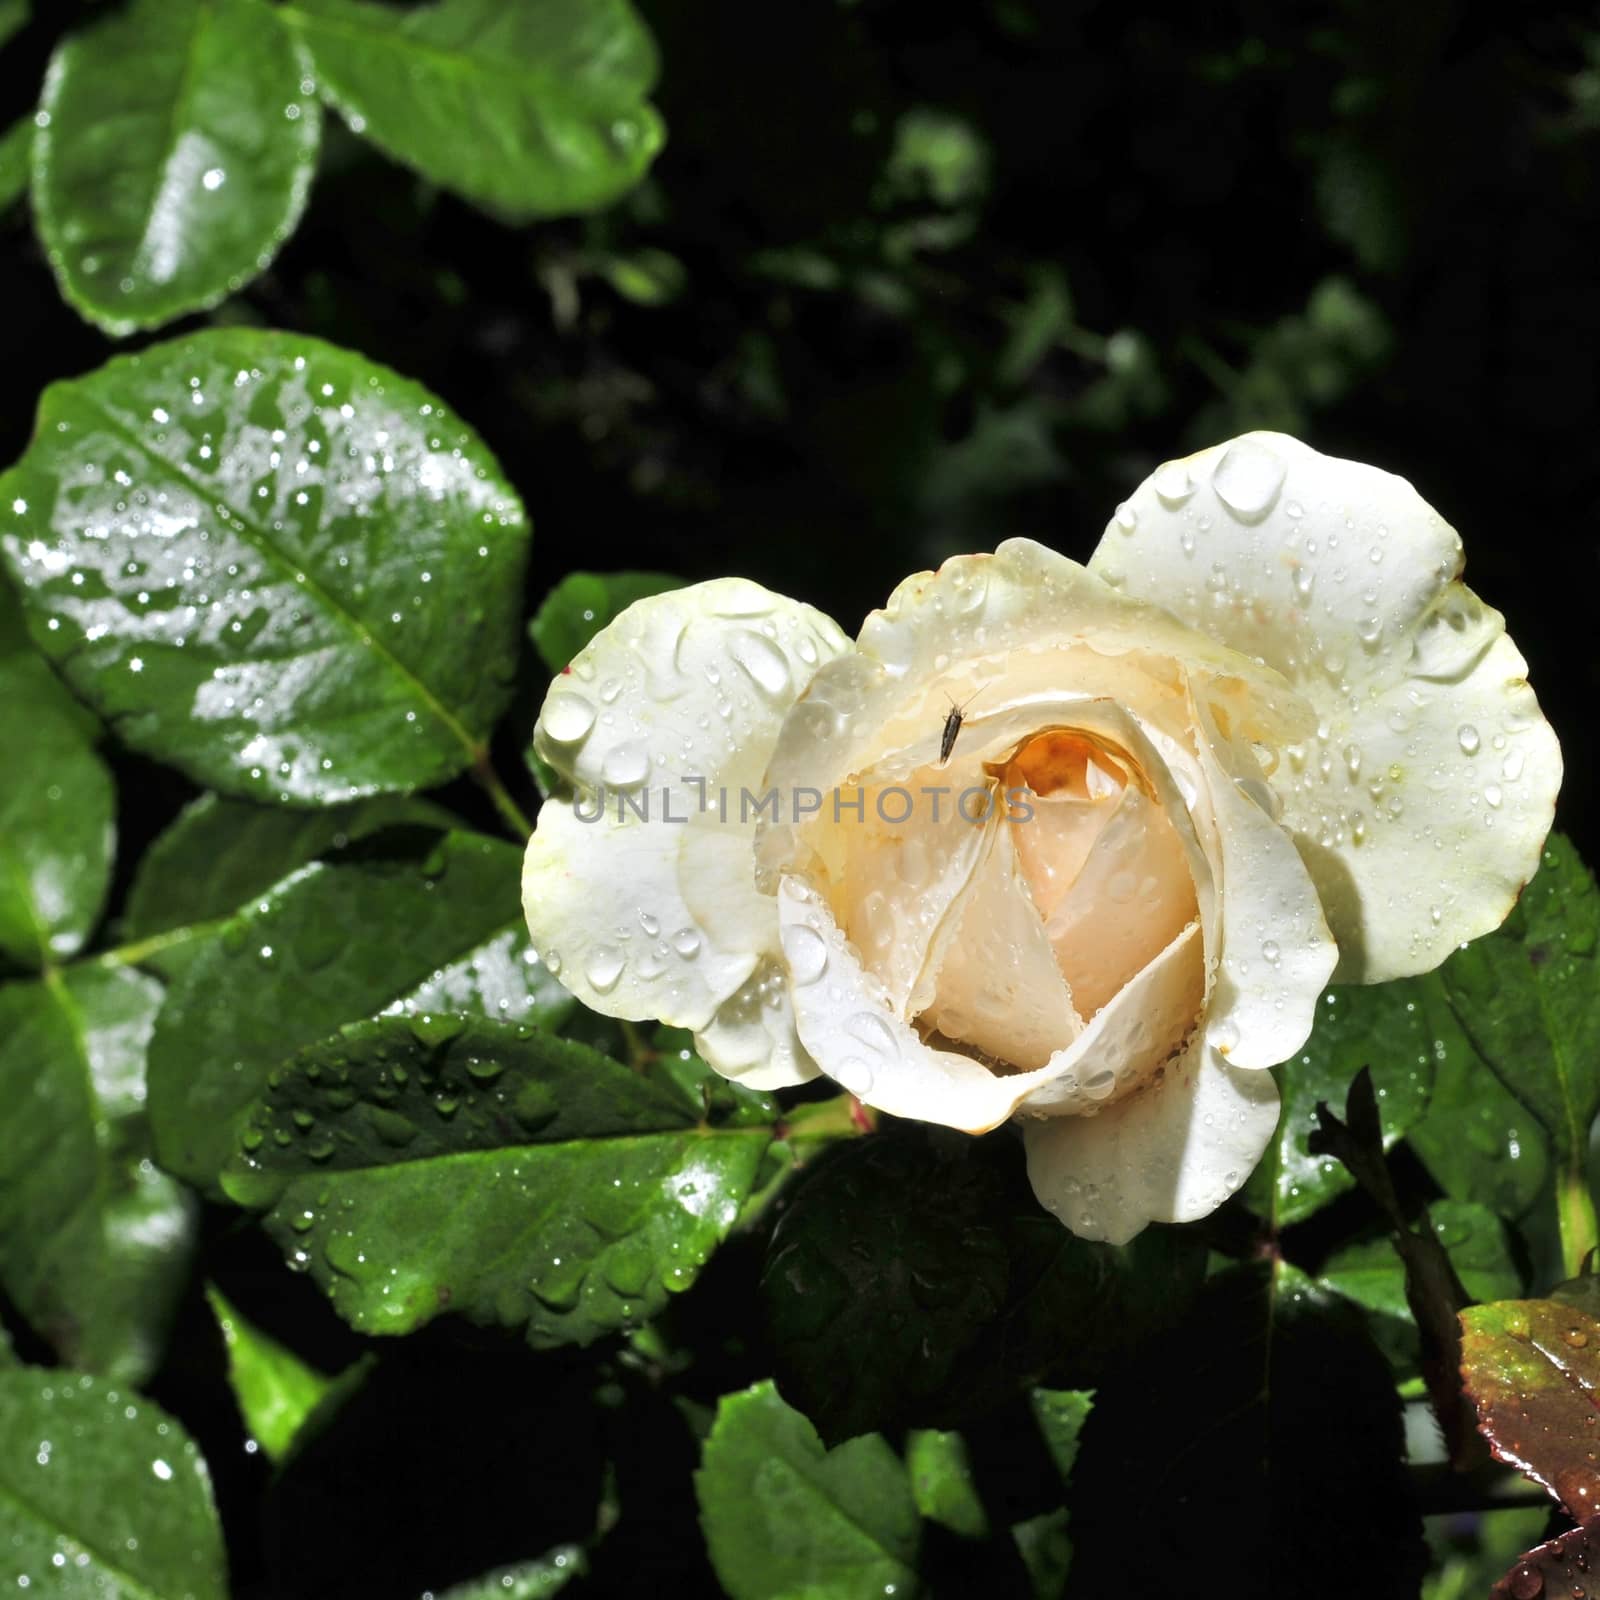 raindrops on Bud cream roses under the sun by valerypetr